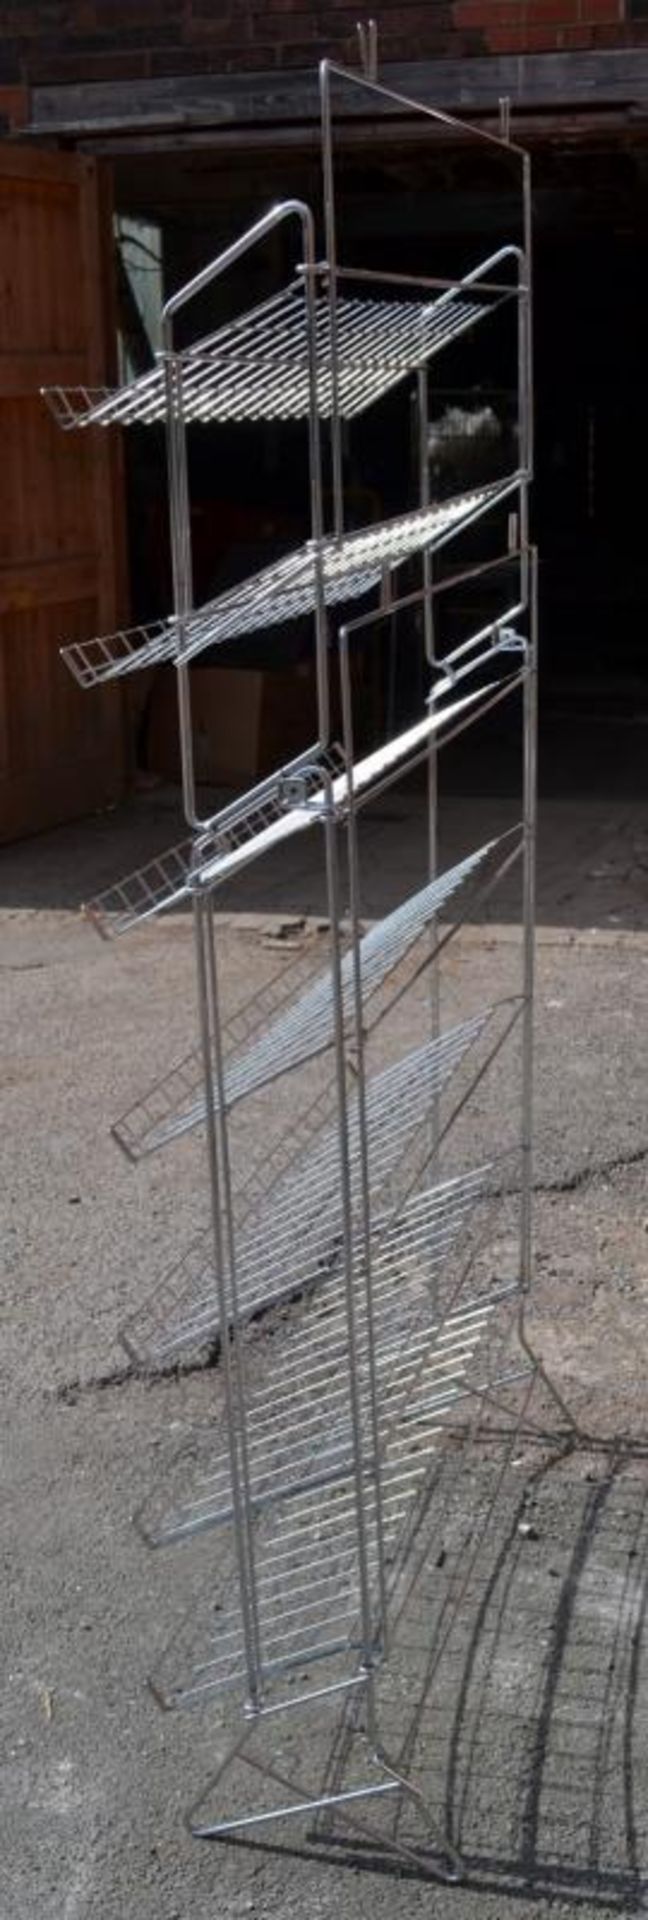 9 x Freestanding Retail Shoe Display Racks - Recently Removed From A Major UK Store - Chrome Finish - Image 3 of 4